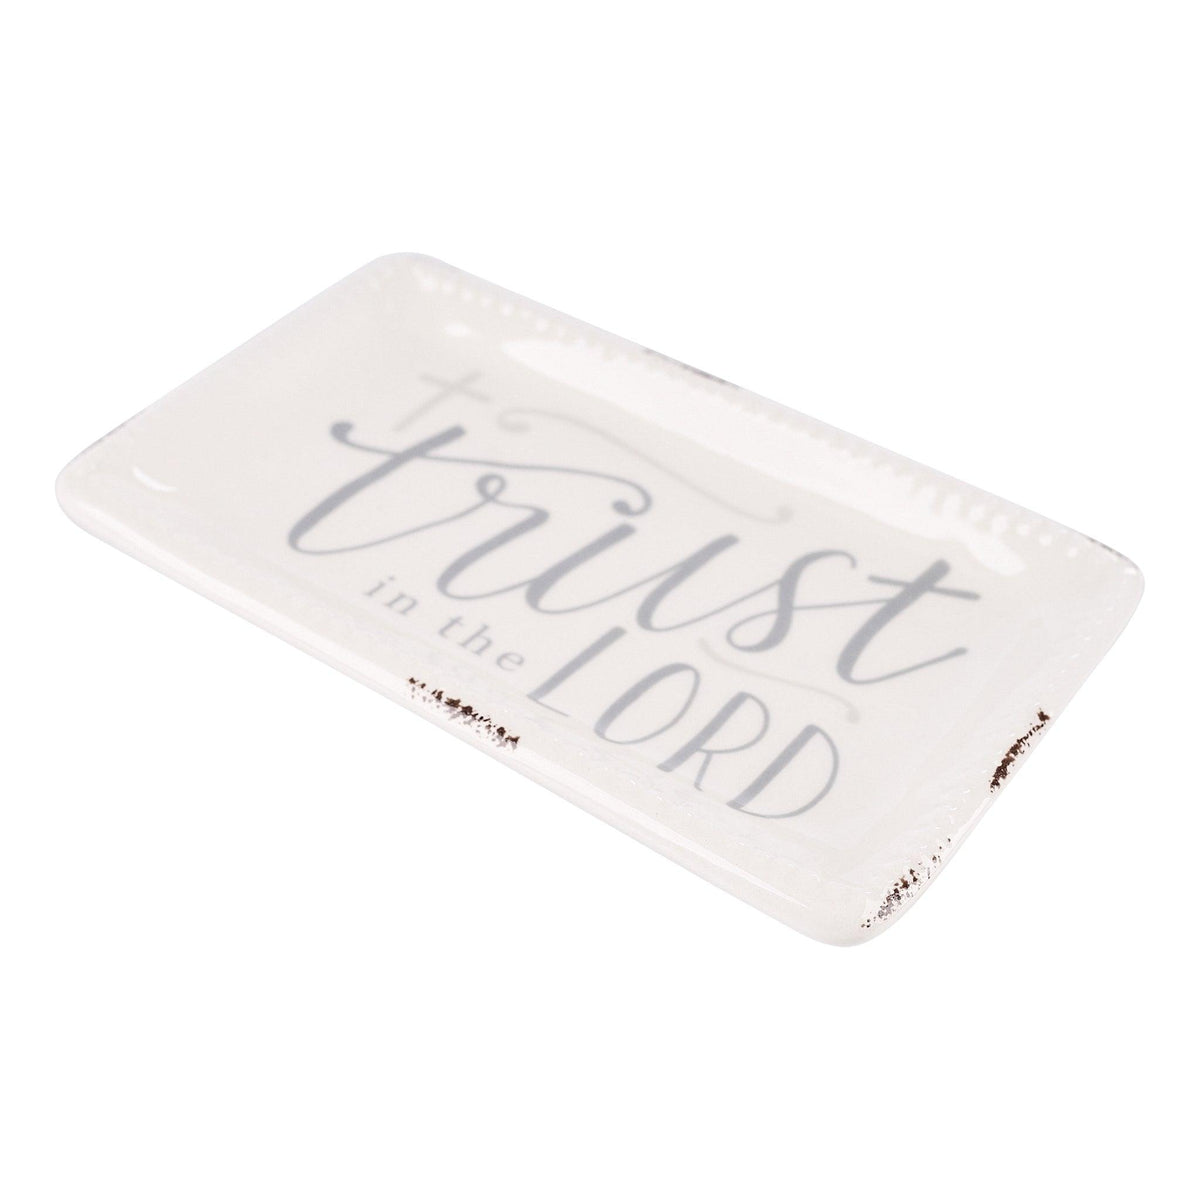 Cross Trust In The Lord Trinket Tray - GLORY HAUS 